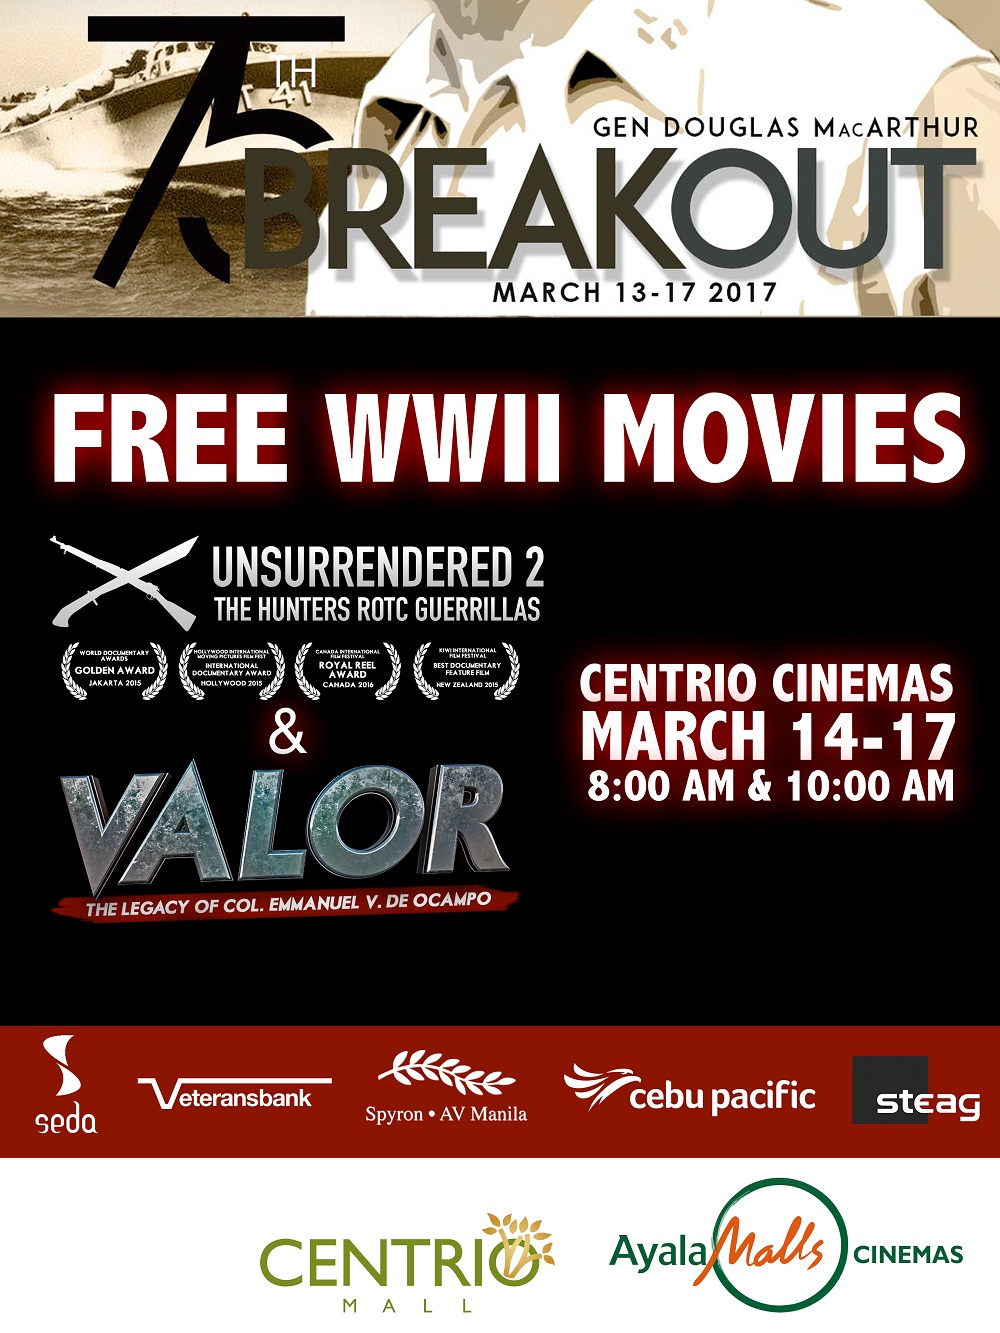 Free WWII Movies